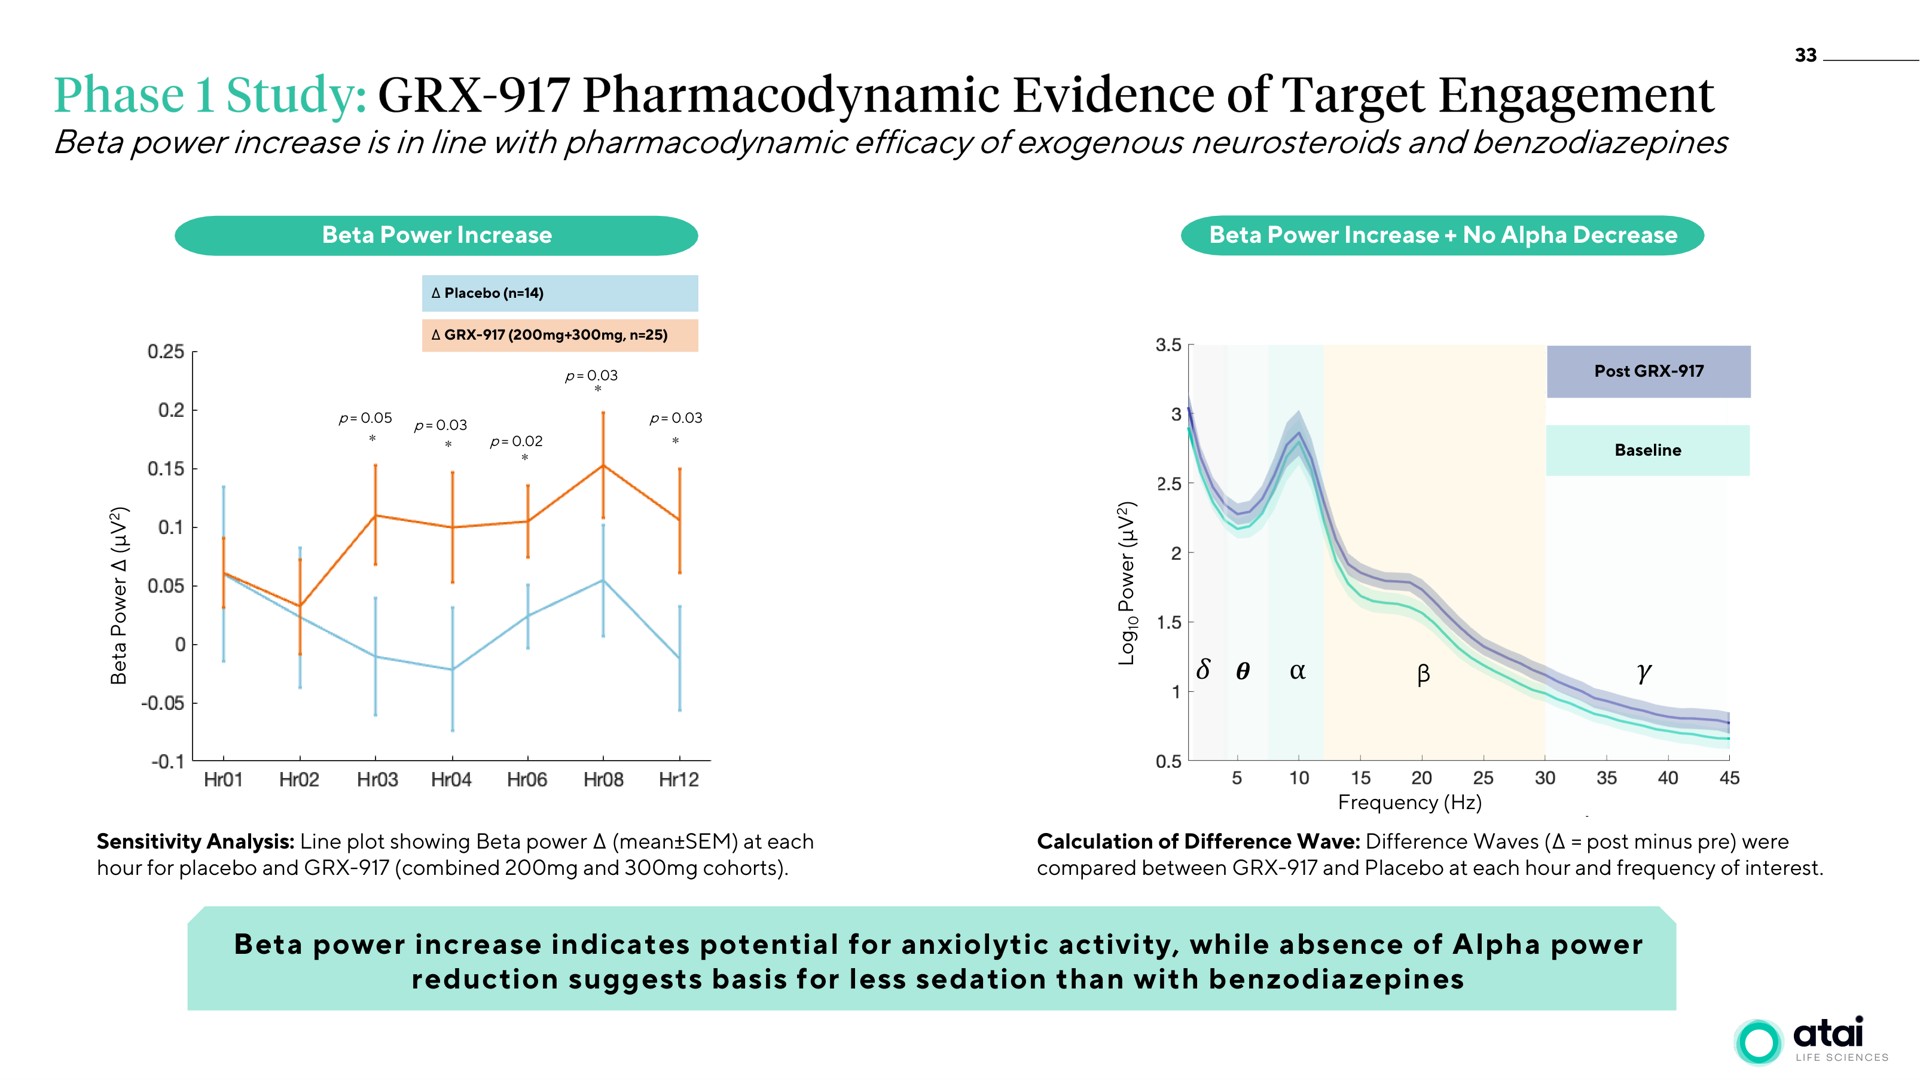 beta power increase is in line with pharmacodynamic efficacy of exogenous phase study evidence target engagement | ATAI